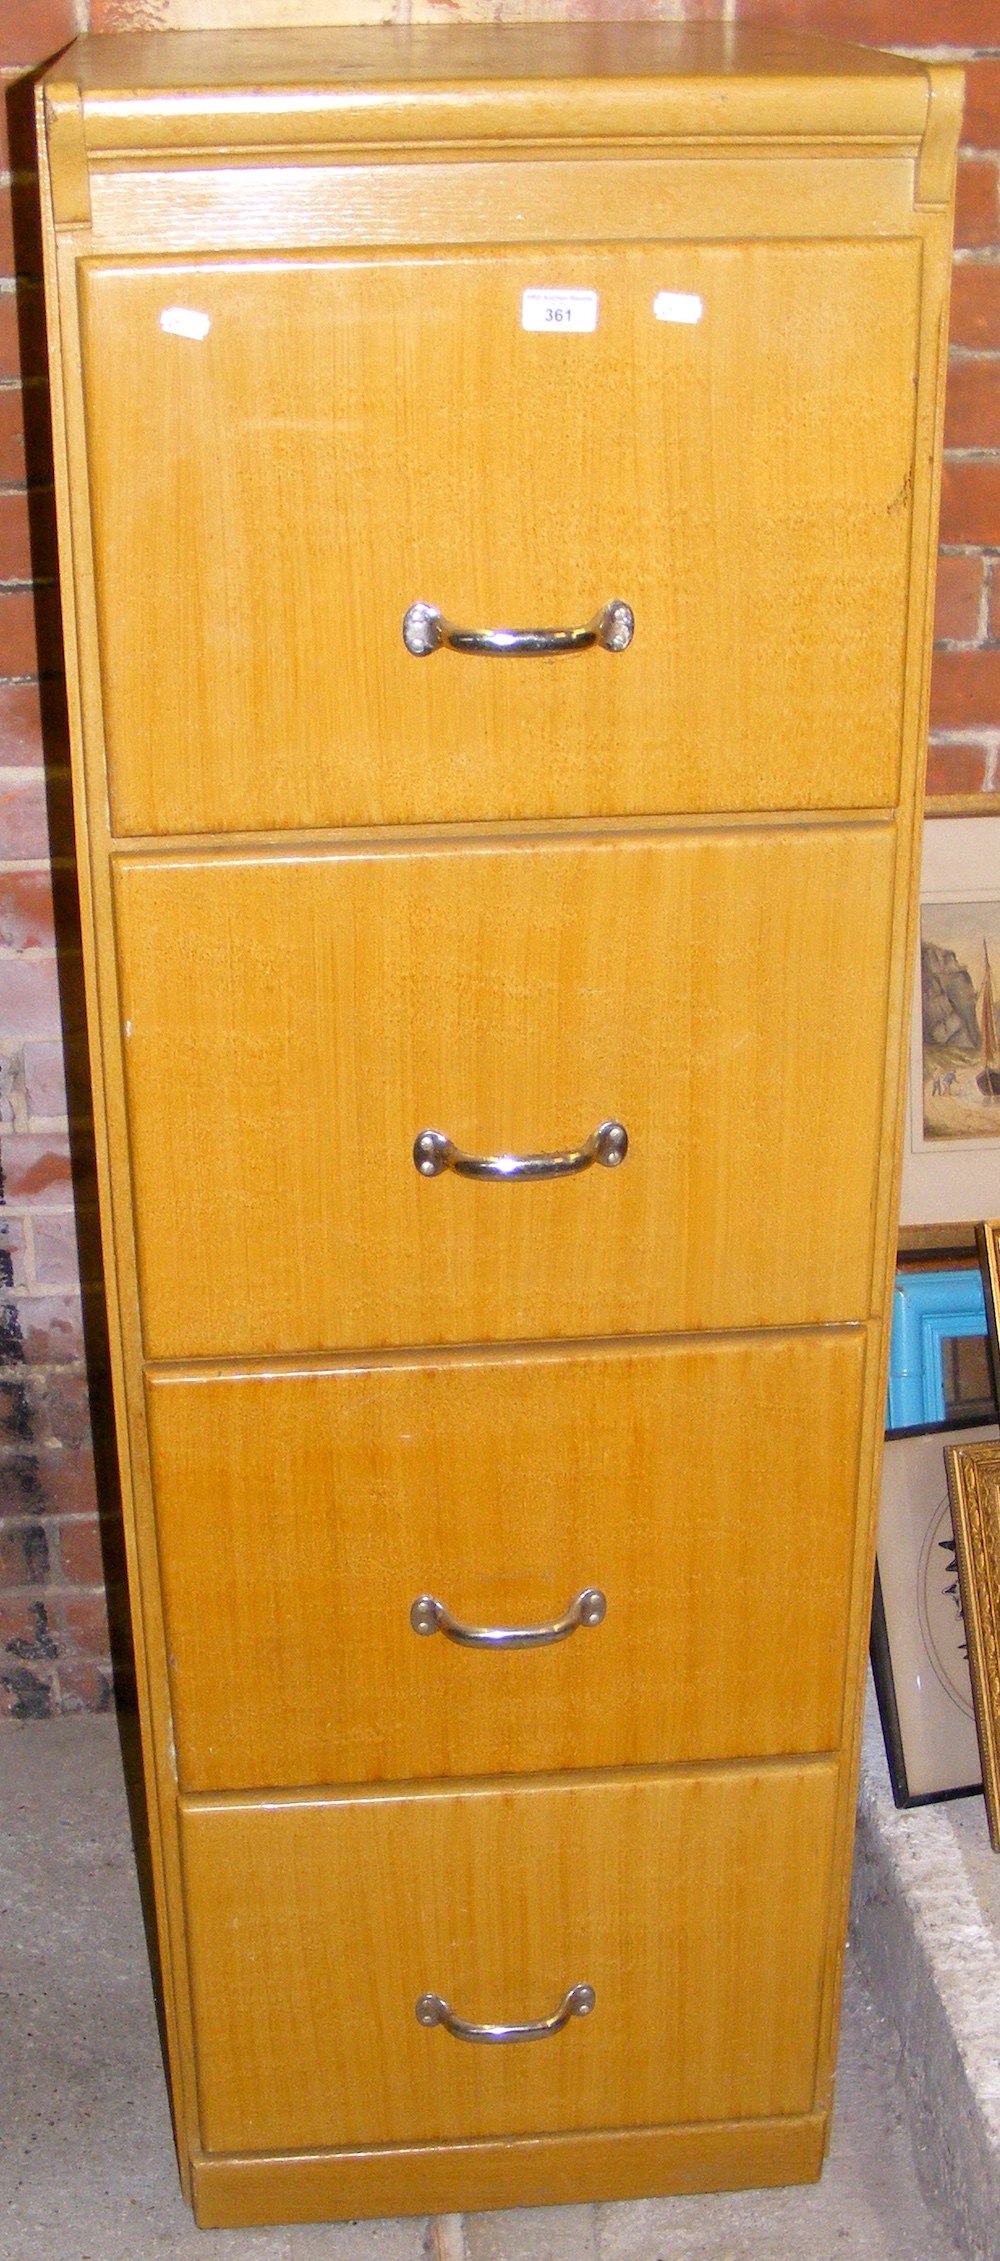 An antique four drawer filing cabinet